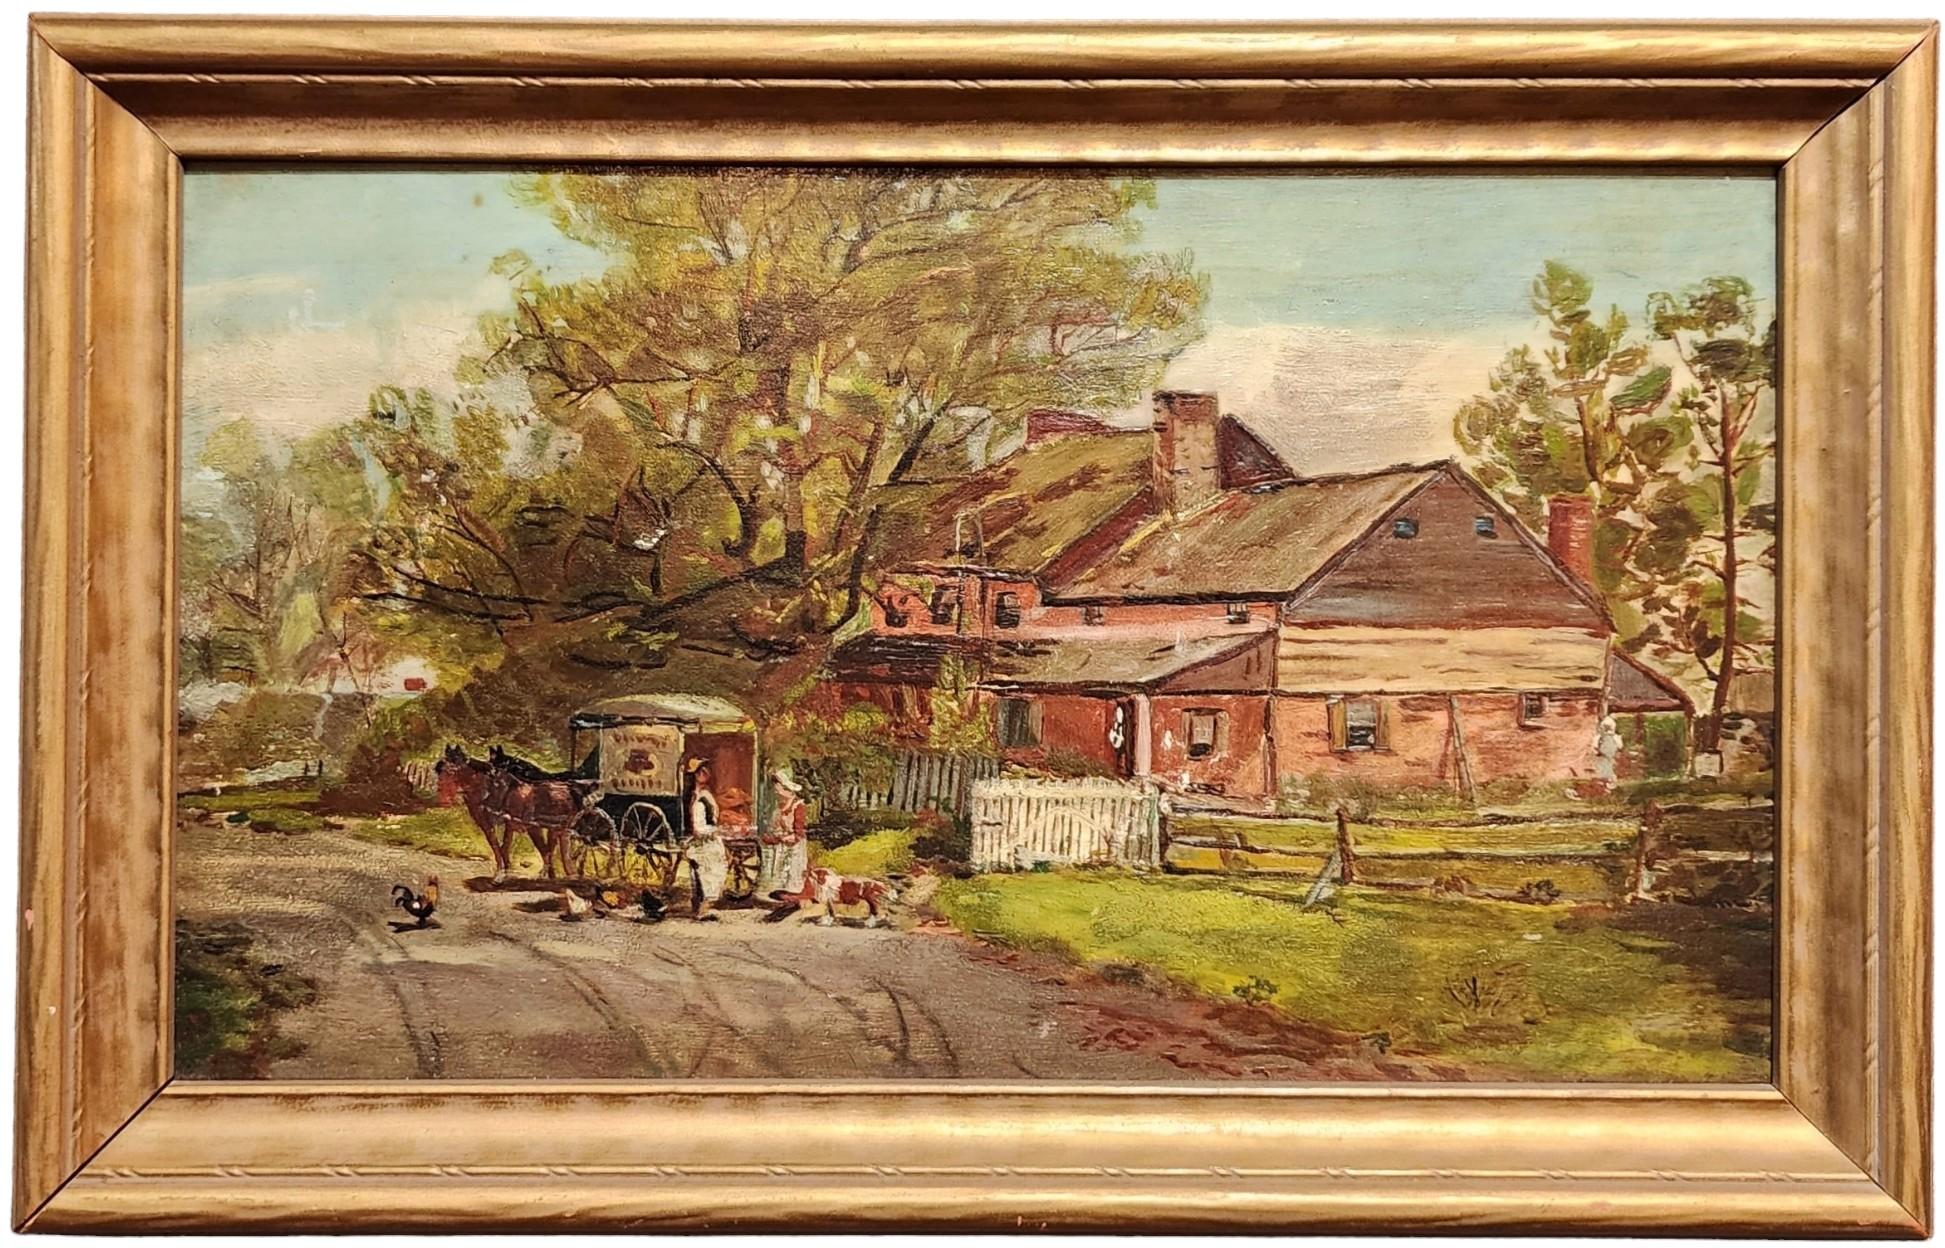 Unknown Landscape Painting - The Delivery, Horse and Cart, American Farm Painting, Dog, Rooster